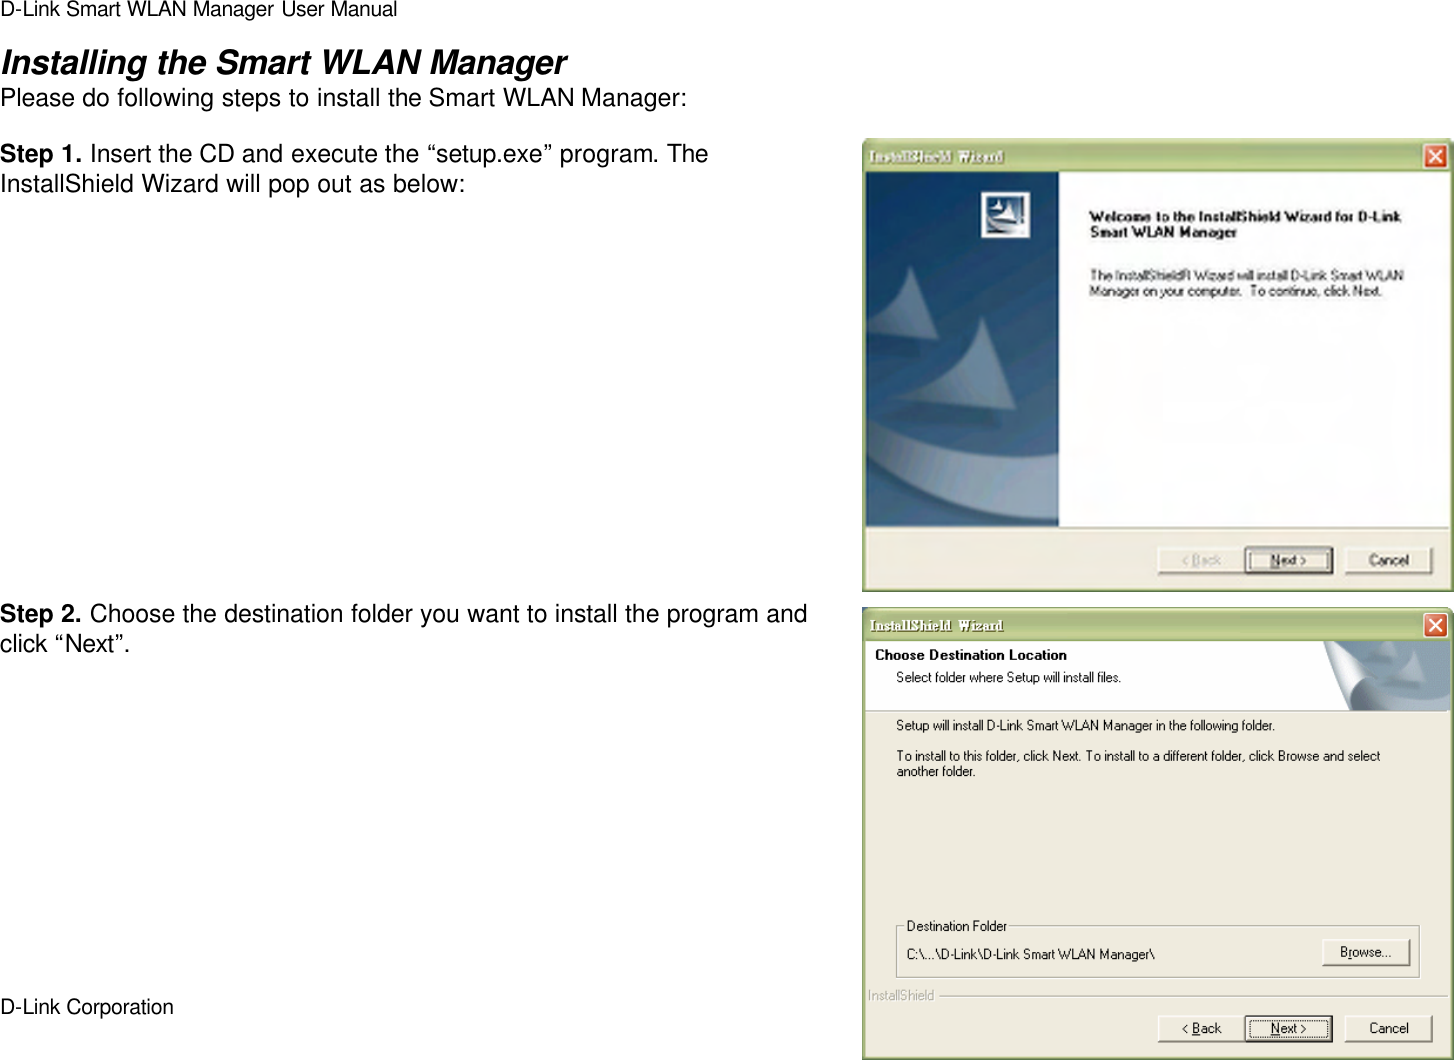 D-Link Smart WLAN Manager User Manual  D-Link Corporation    5  Installing the Smart WLAN Manager Please do following steps to install the Smart WLAN Manager:  Step 1. Insert the CD and execute the “setup.exe” program. The InstallShield Wizard will pop out as below:               Step 2. Choose the destination folder you want to install the program and click “Next”.            